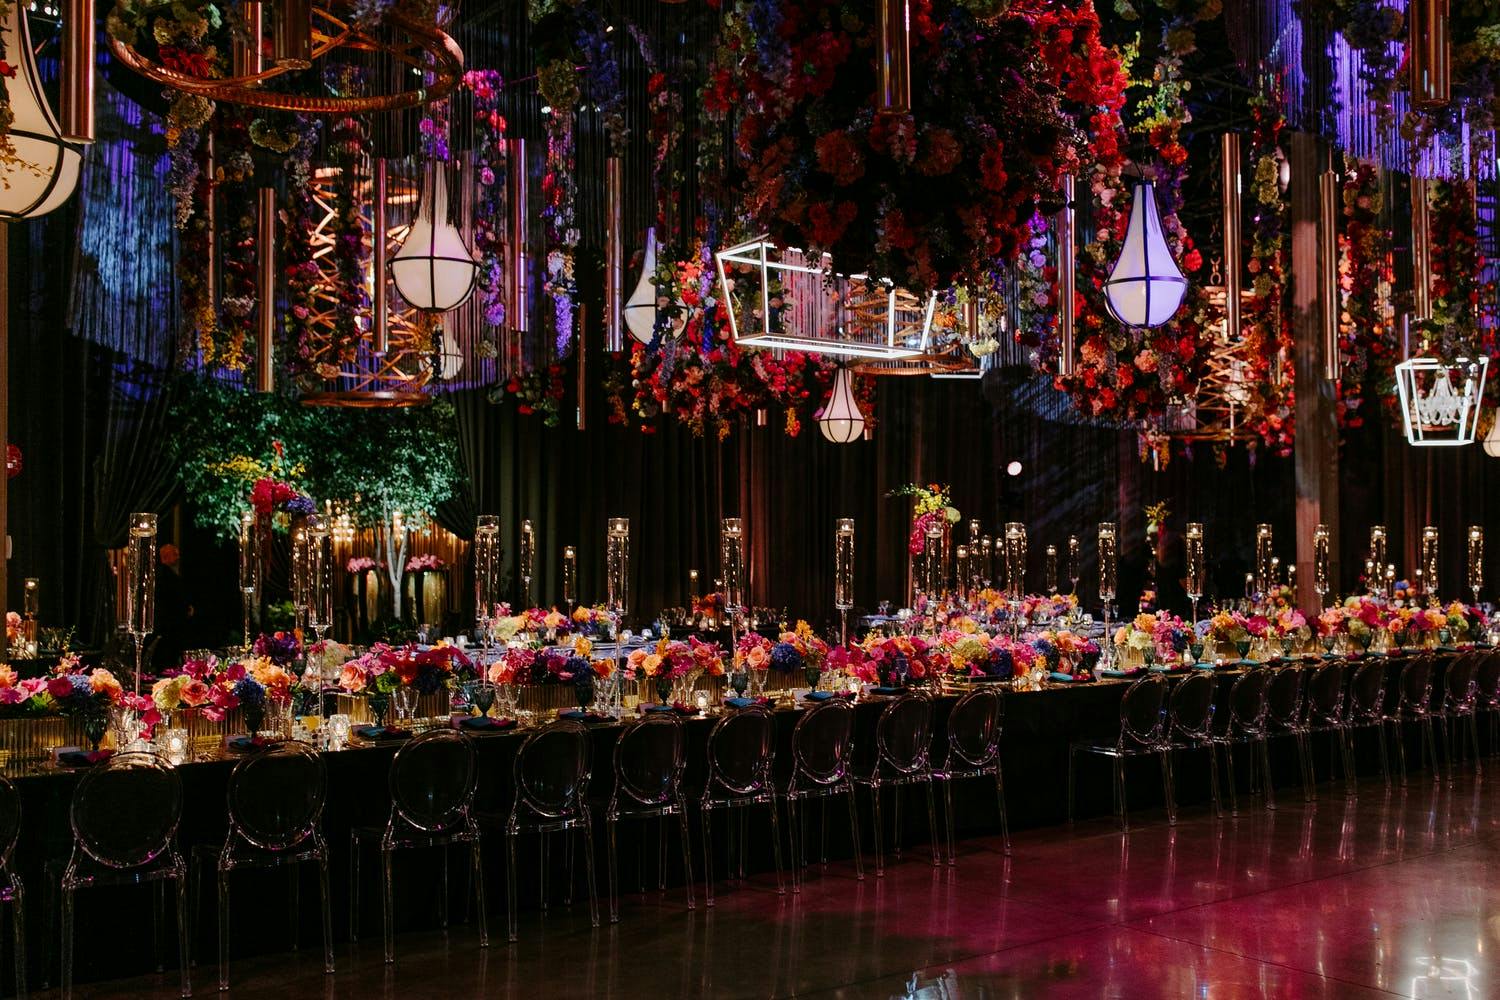 Vibrant wedding reception with colorful flowers and geometric ceiling decorations and lighting | PartySlate